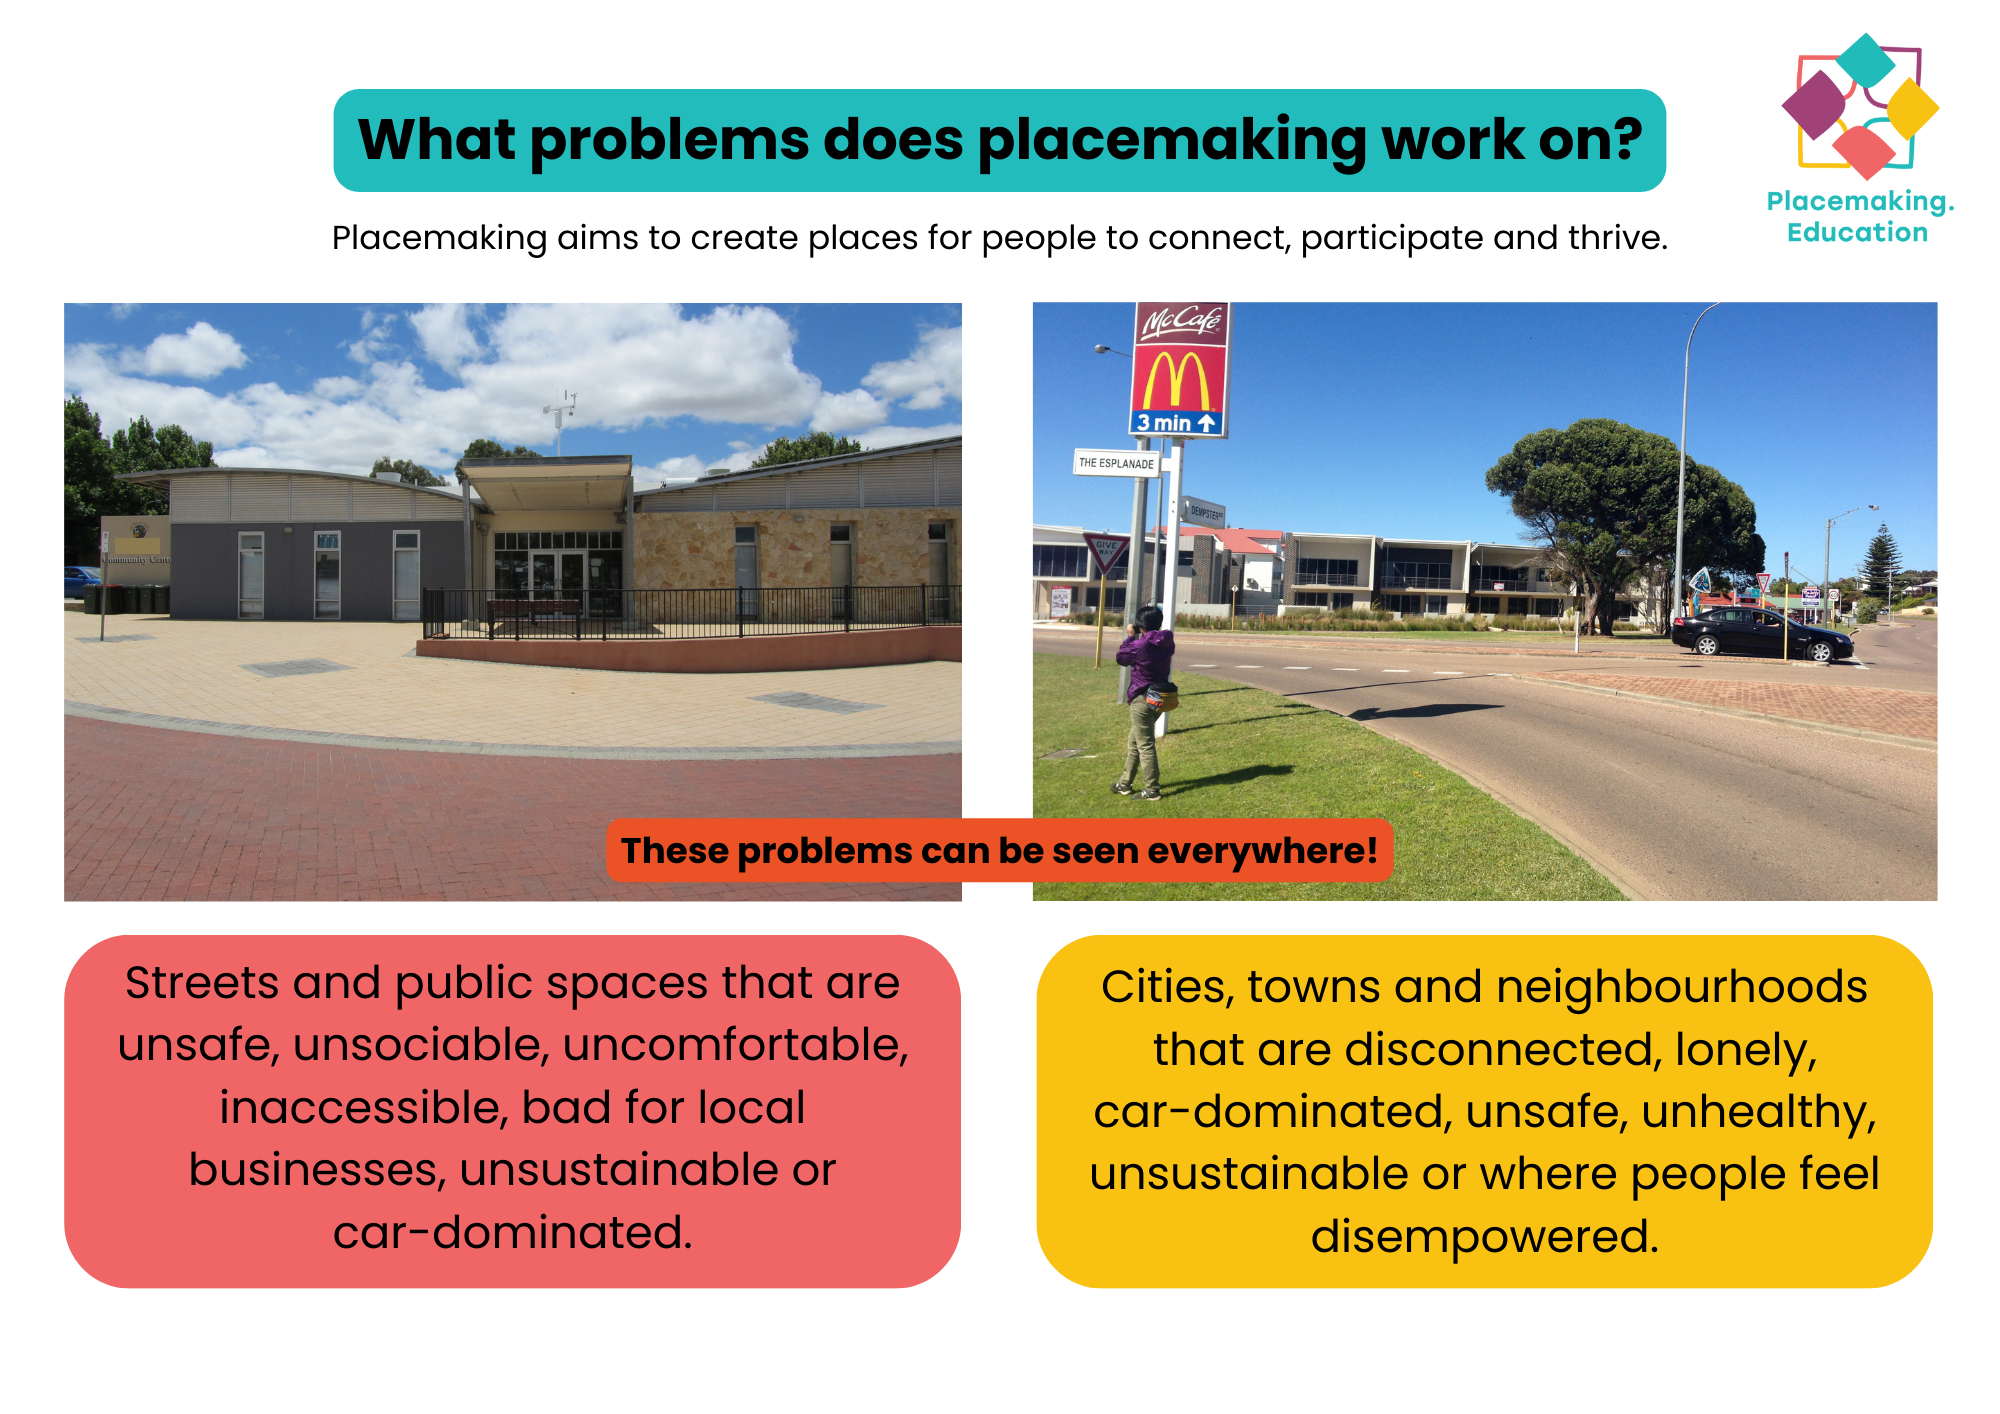 What problems does placemaking work on? Two photos are shown showing streets and public spaces that are unsafe, unsociable, uncomfortable, disconnected, inaccessible or car-dominated